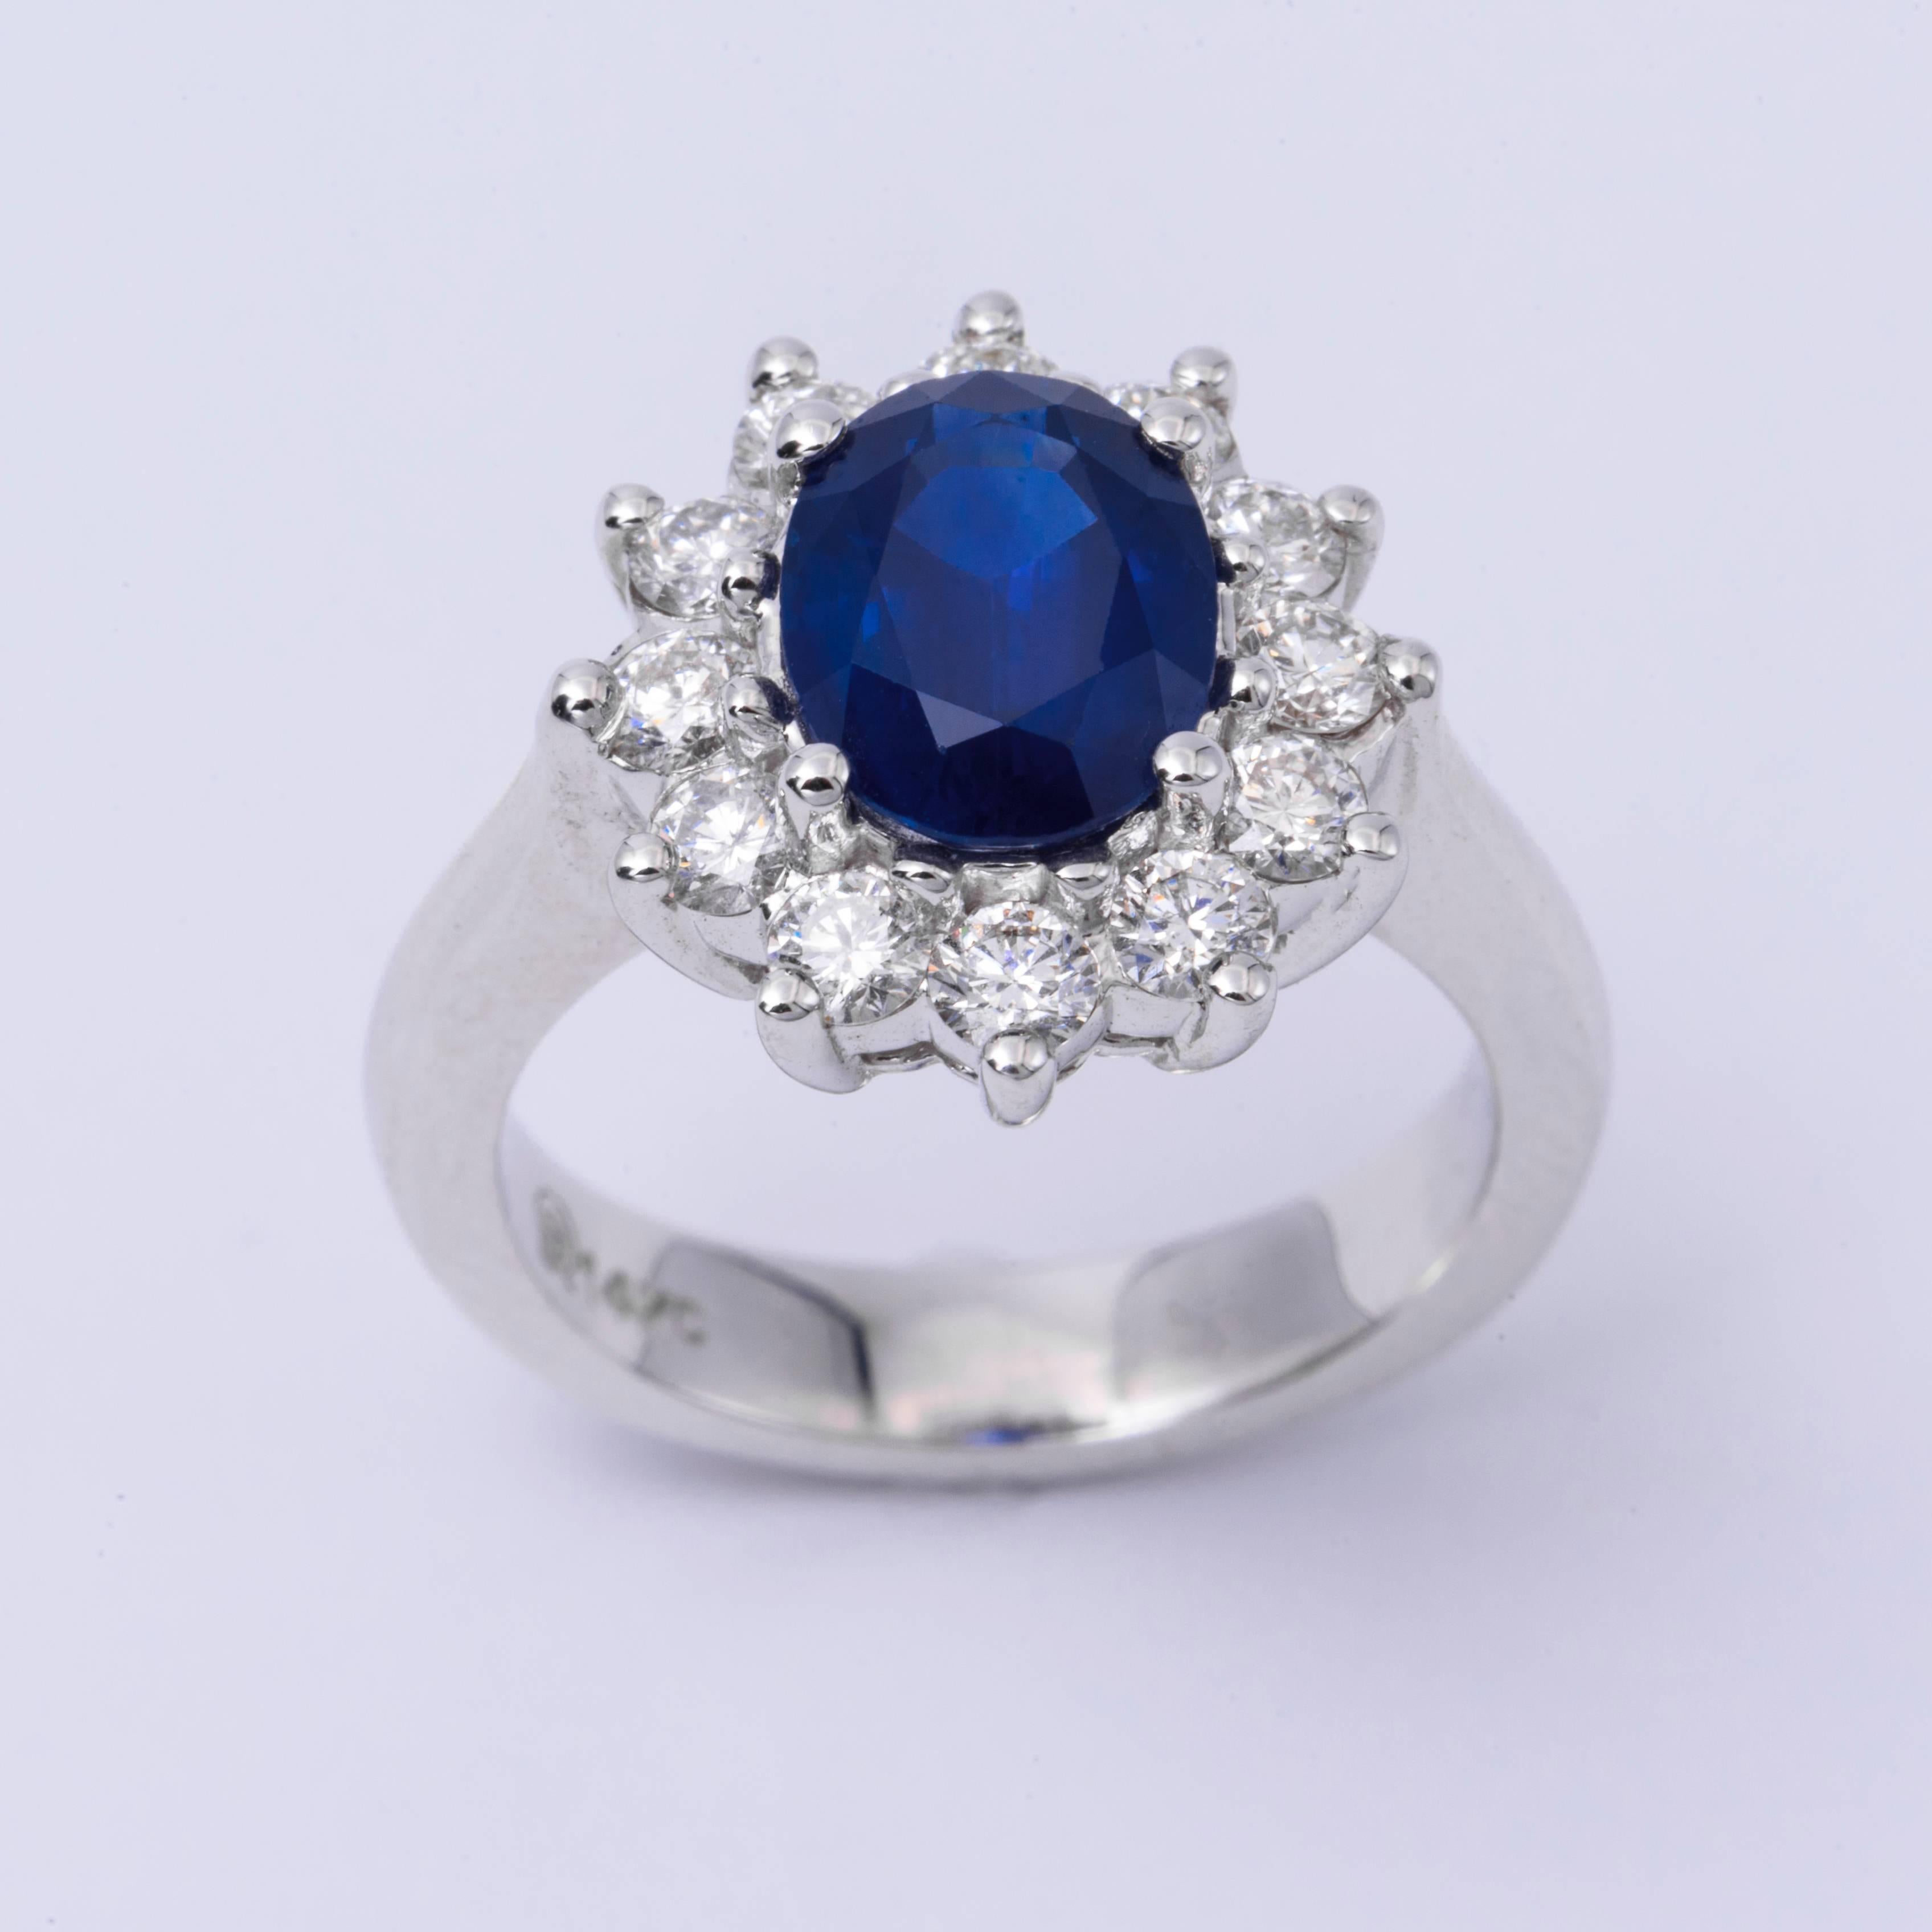 Style: 14k Oval Shape Sapphire Diamond Halo Engagement Ring
Material: 14k White Gold
Gemstone Details: 1 Oval Shape Sapphire approximately 2.19
Diamond Details: Approximately 0.84 ct of diamonds. Diamonds are H in color and SI in clarity.
Ring Size: